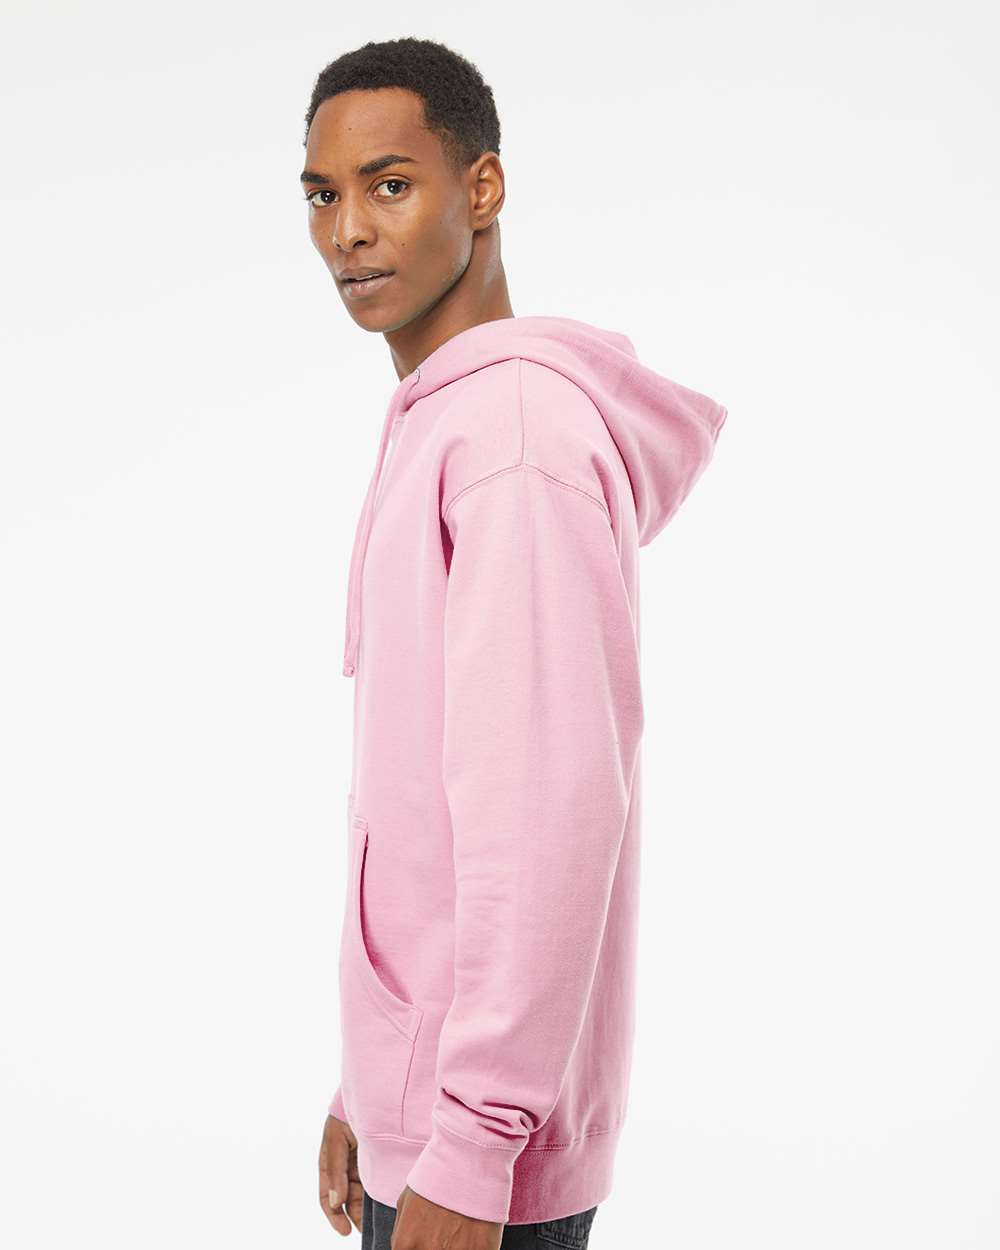 Independent Trading Co. Midweight Hooded Sweatshirt SS4500 #colormdl_Light Pink